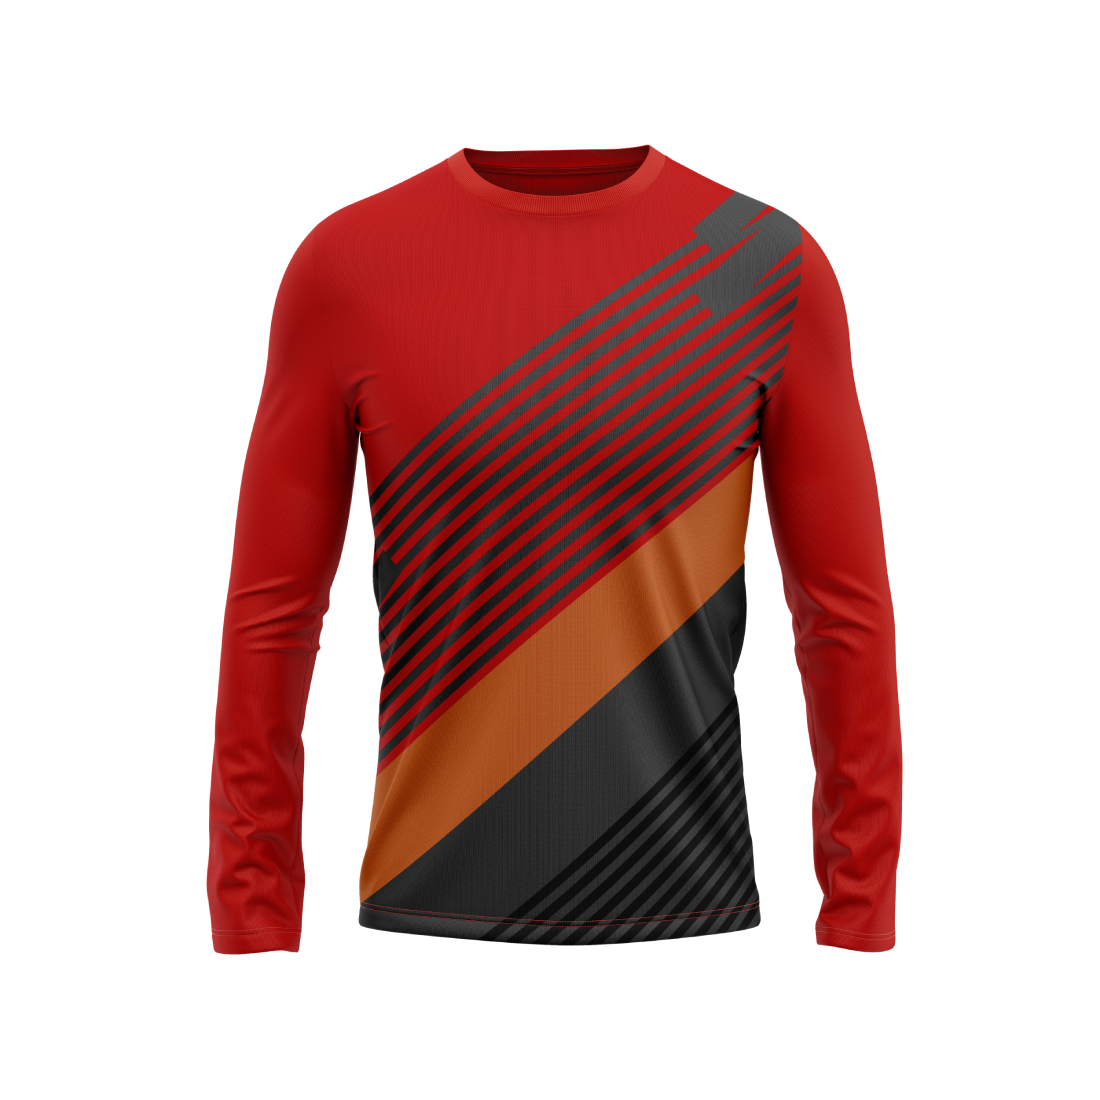 Round Neck Fullsleeve Printed Jersey Red NP50000145